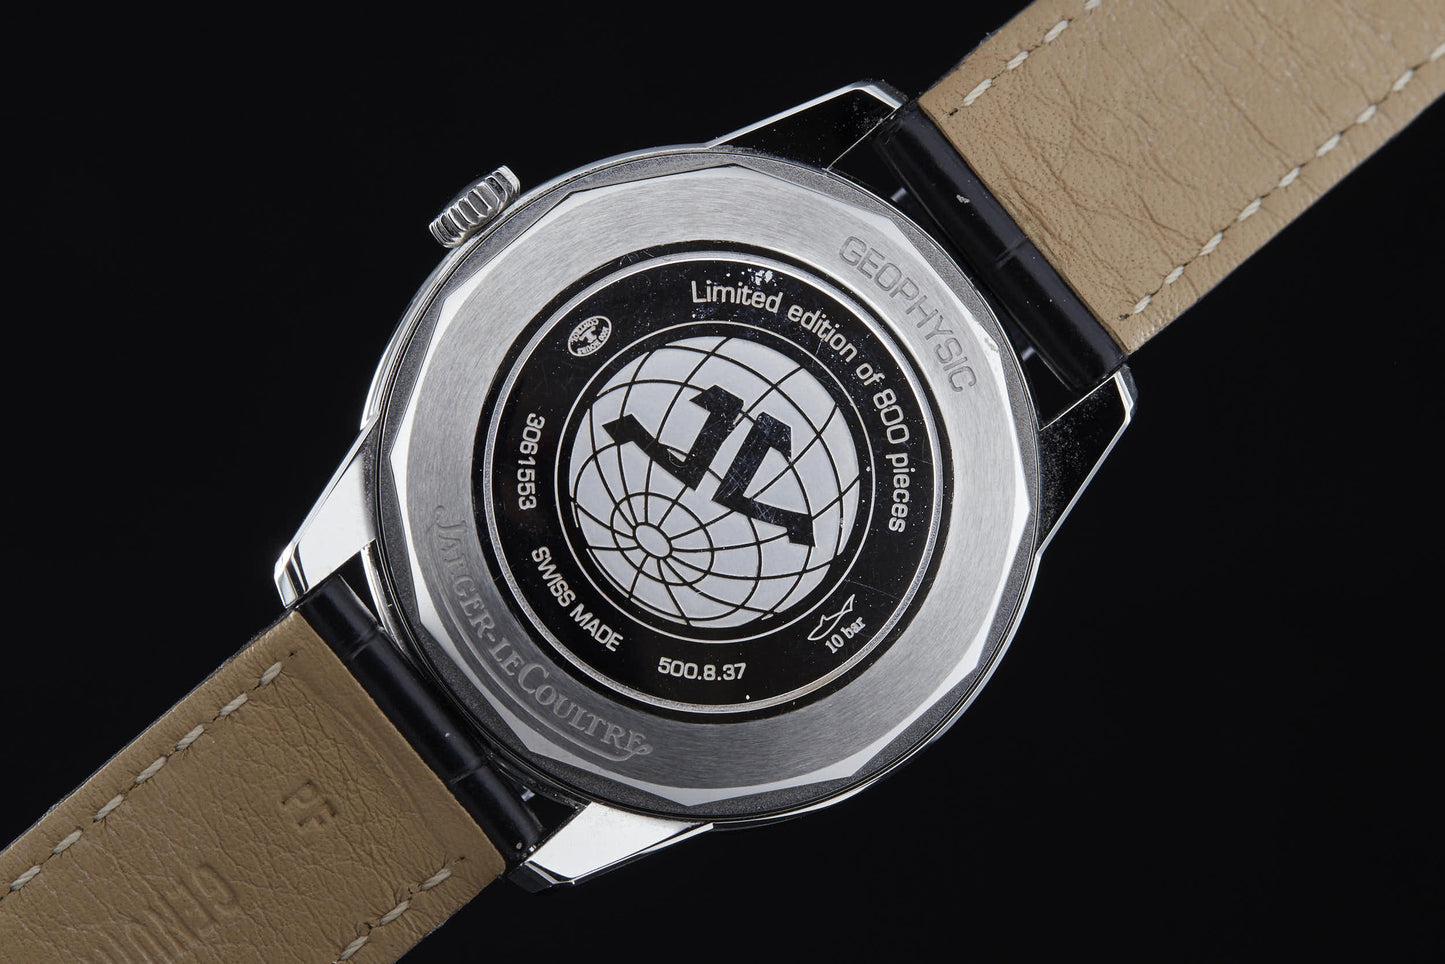 Jaeger LeCoultre Geophysic Tribute to 1958